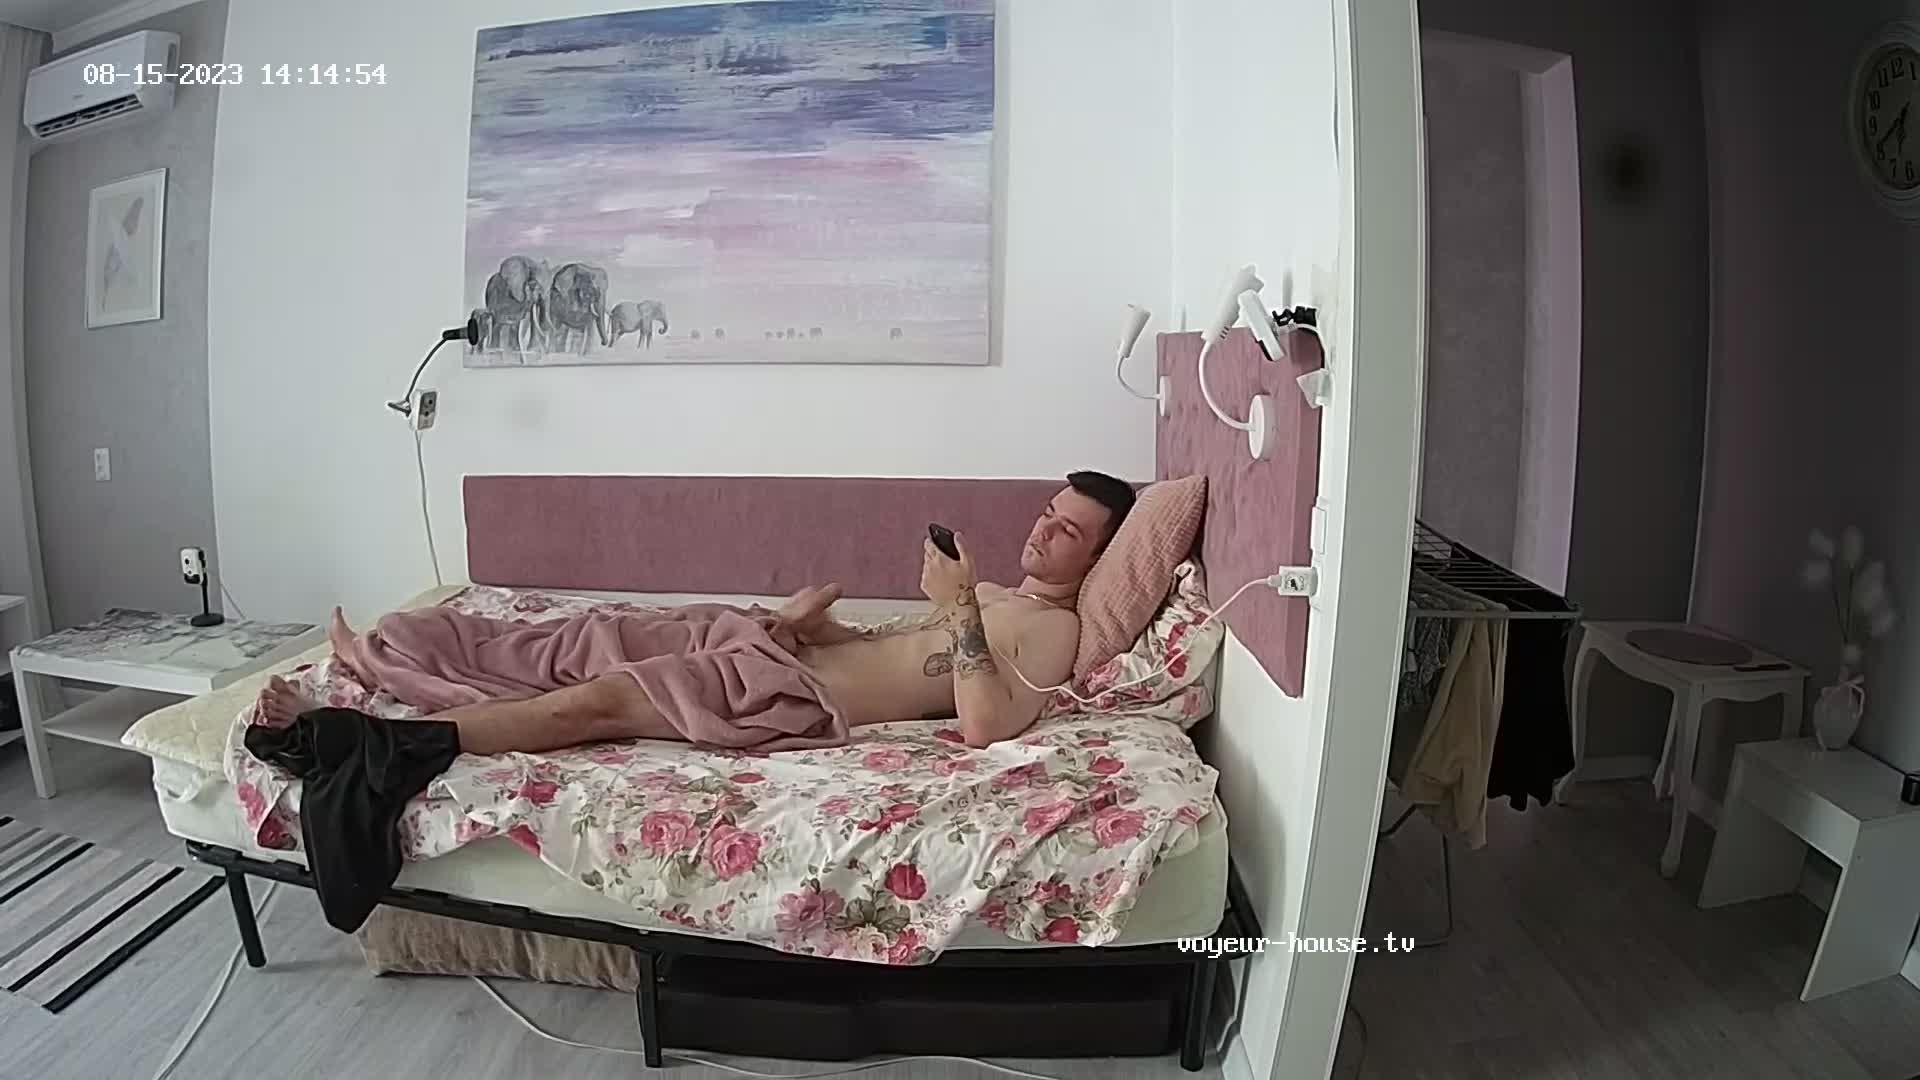 Artem jerking off in the afternoon 15 Aug 2023